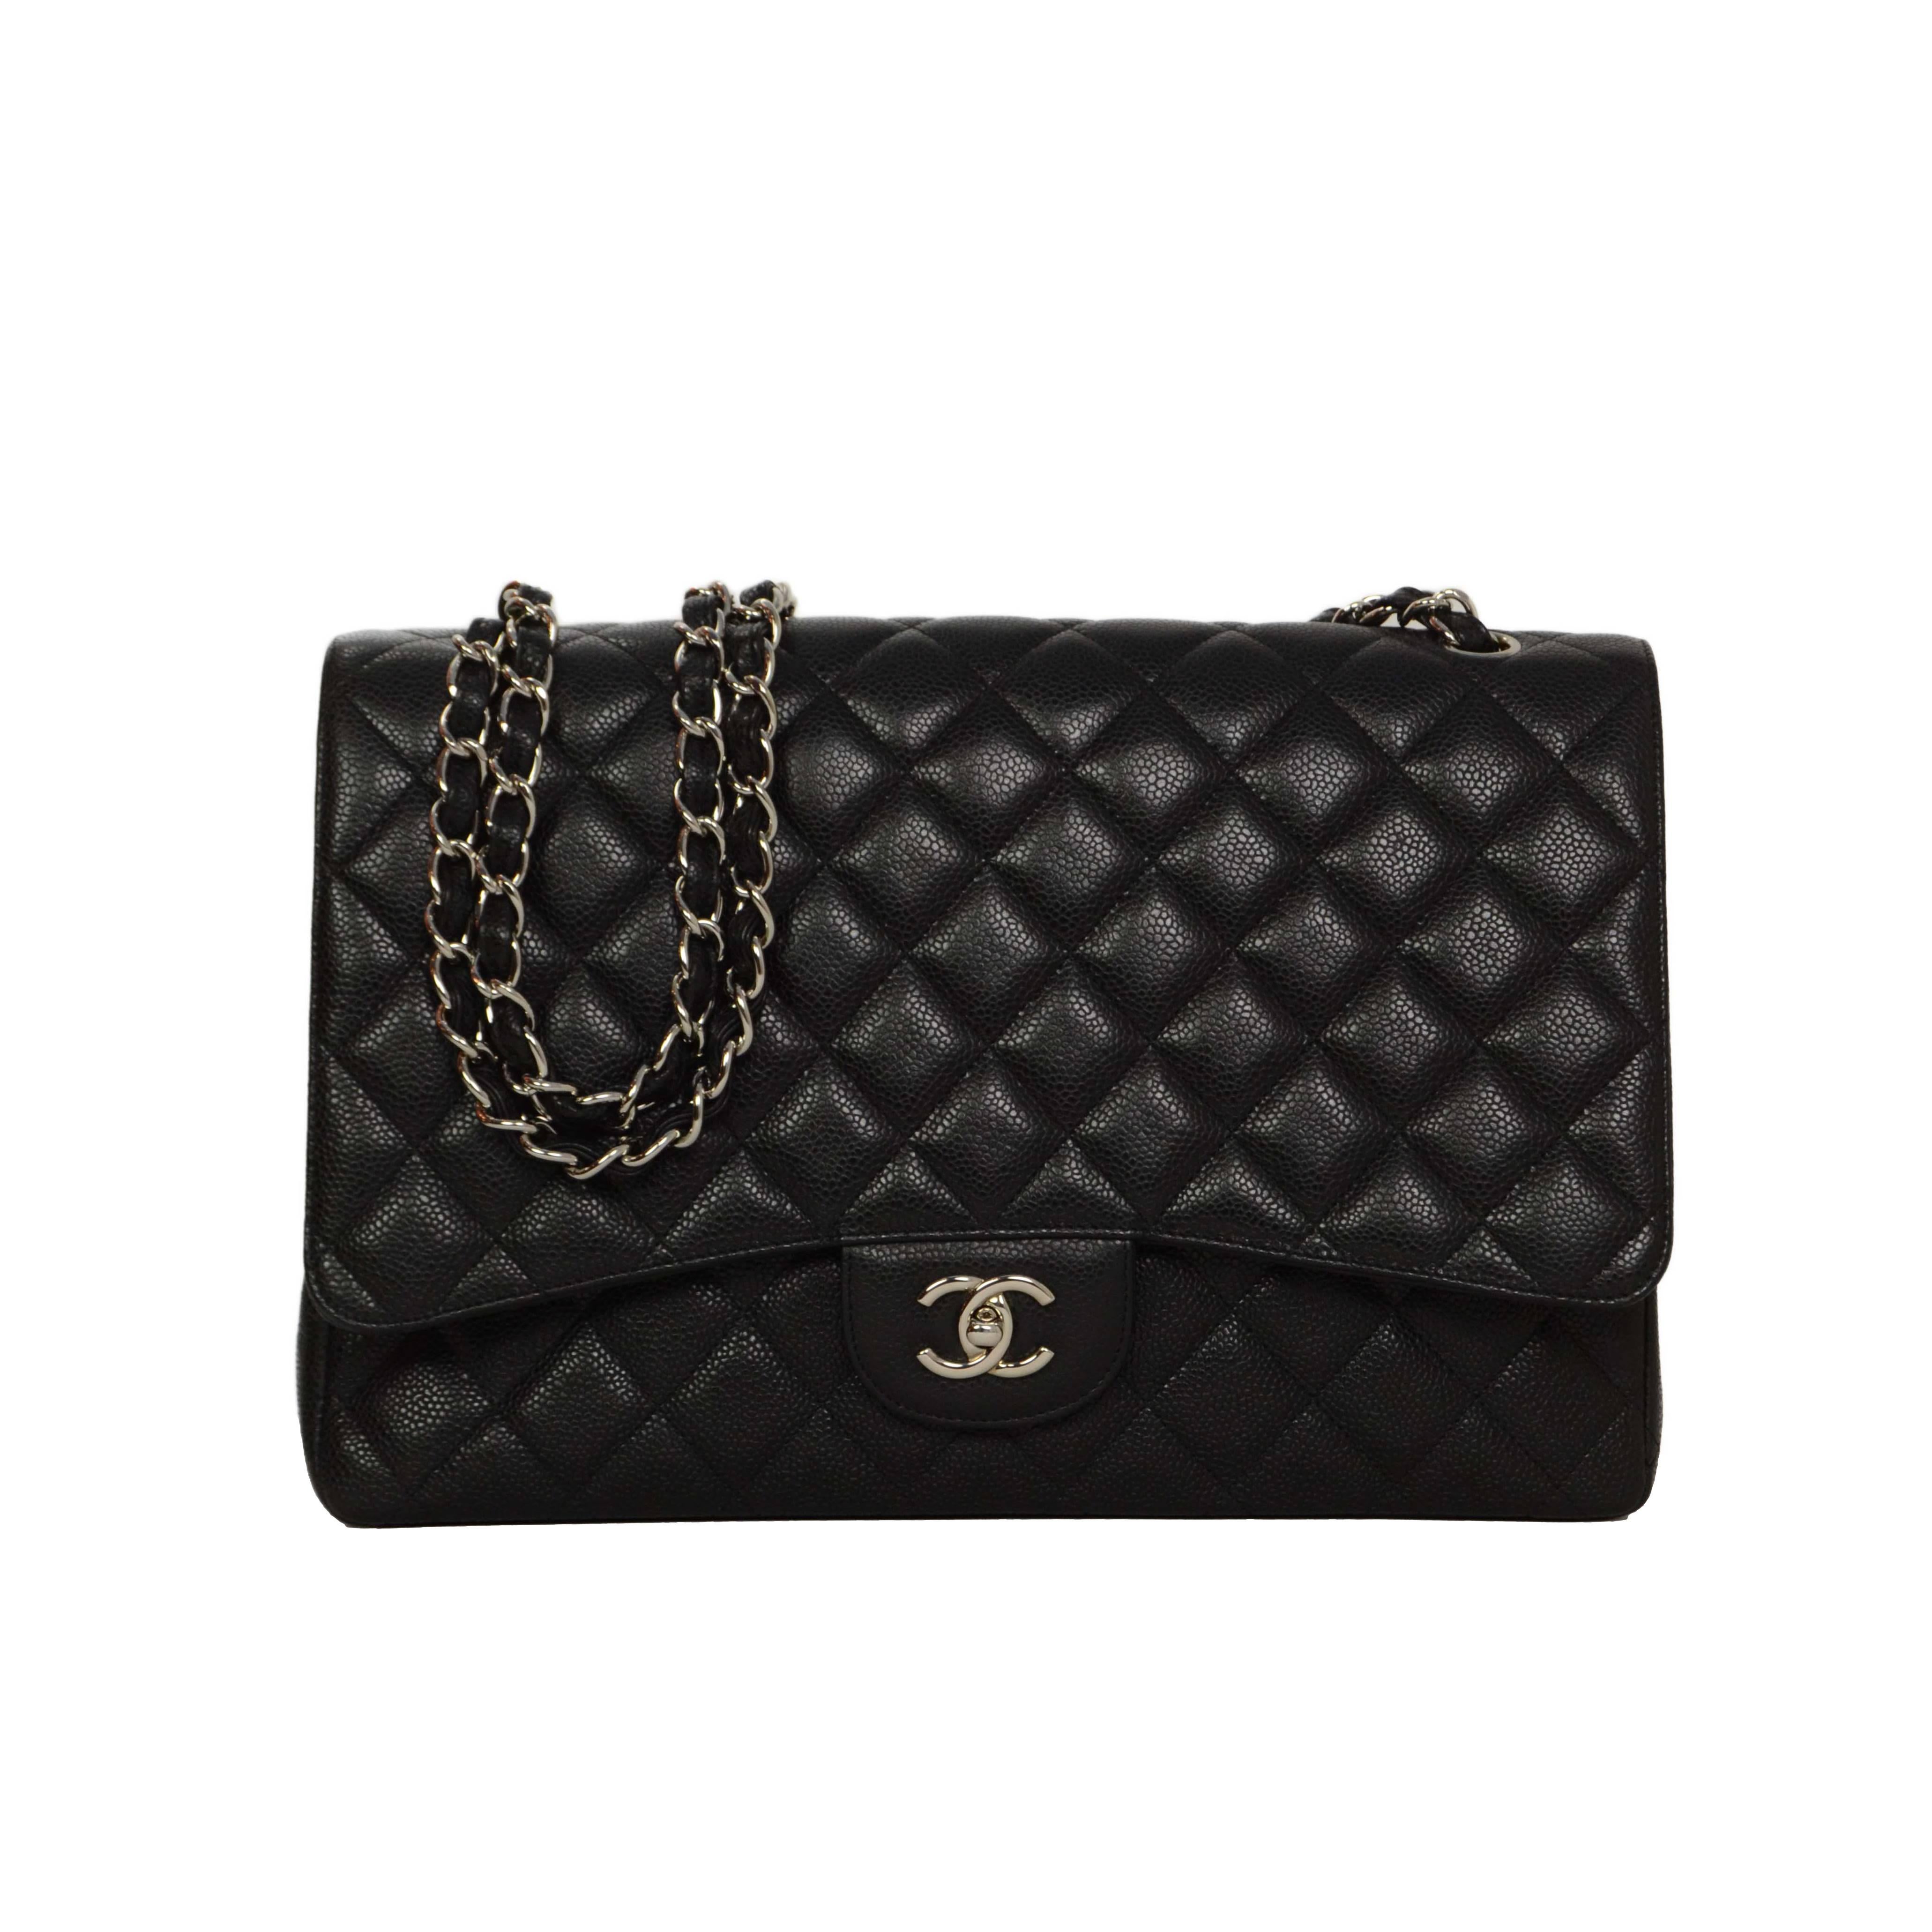 Chanel Black Quilted Caviar Maxi Classic Flap Bag SHW